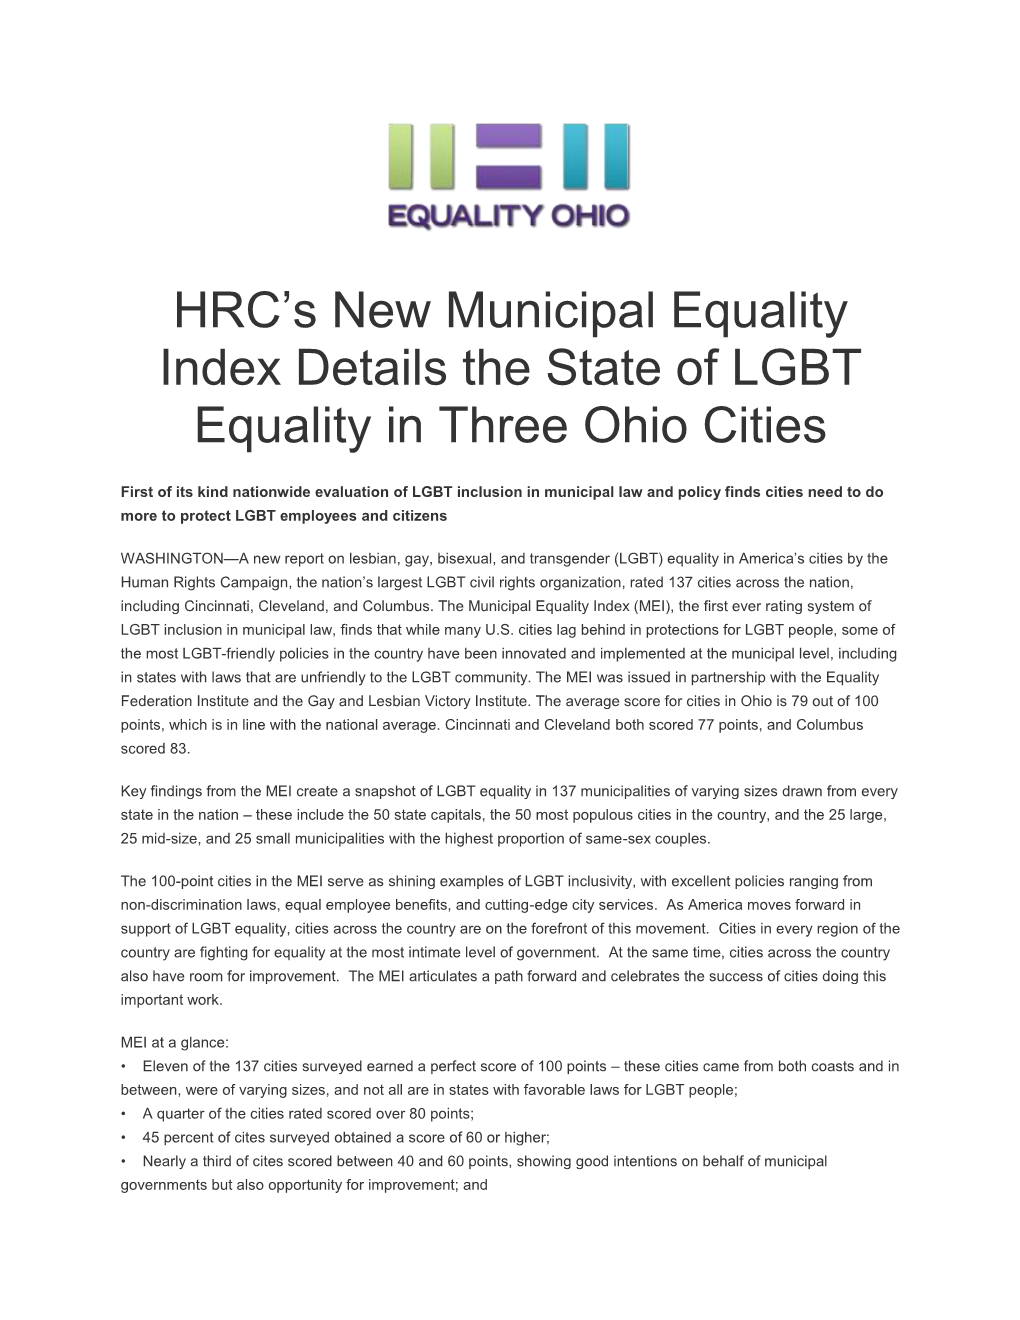 HRC's New Municipal Equality Index Details the State of LGBT Equality